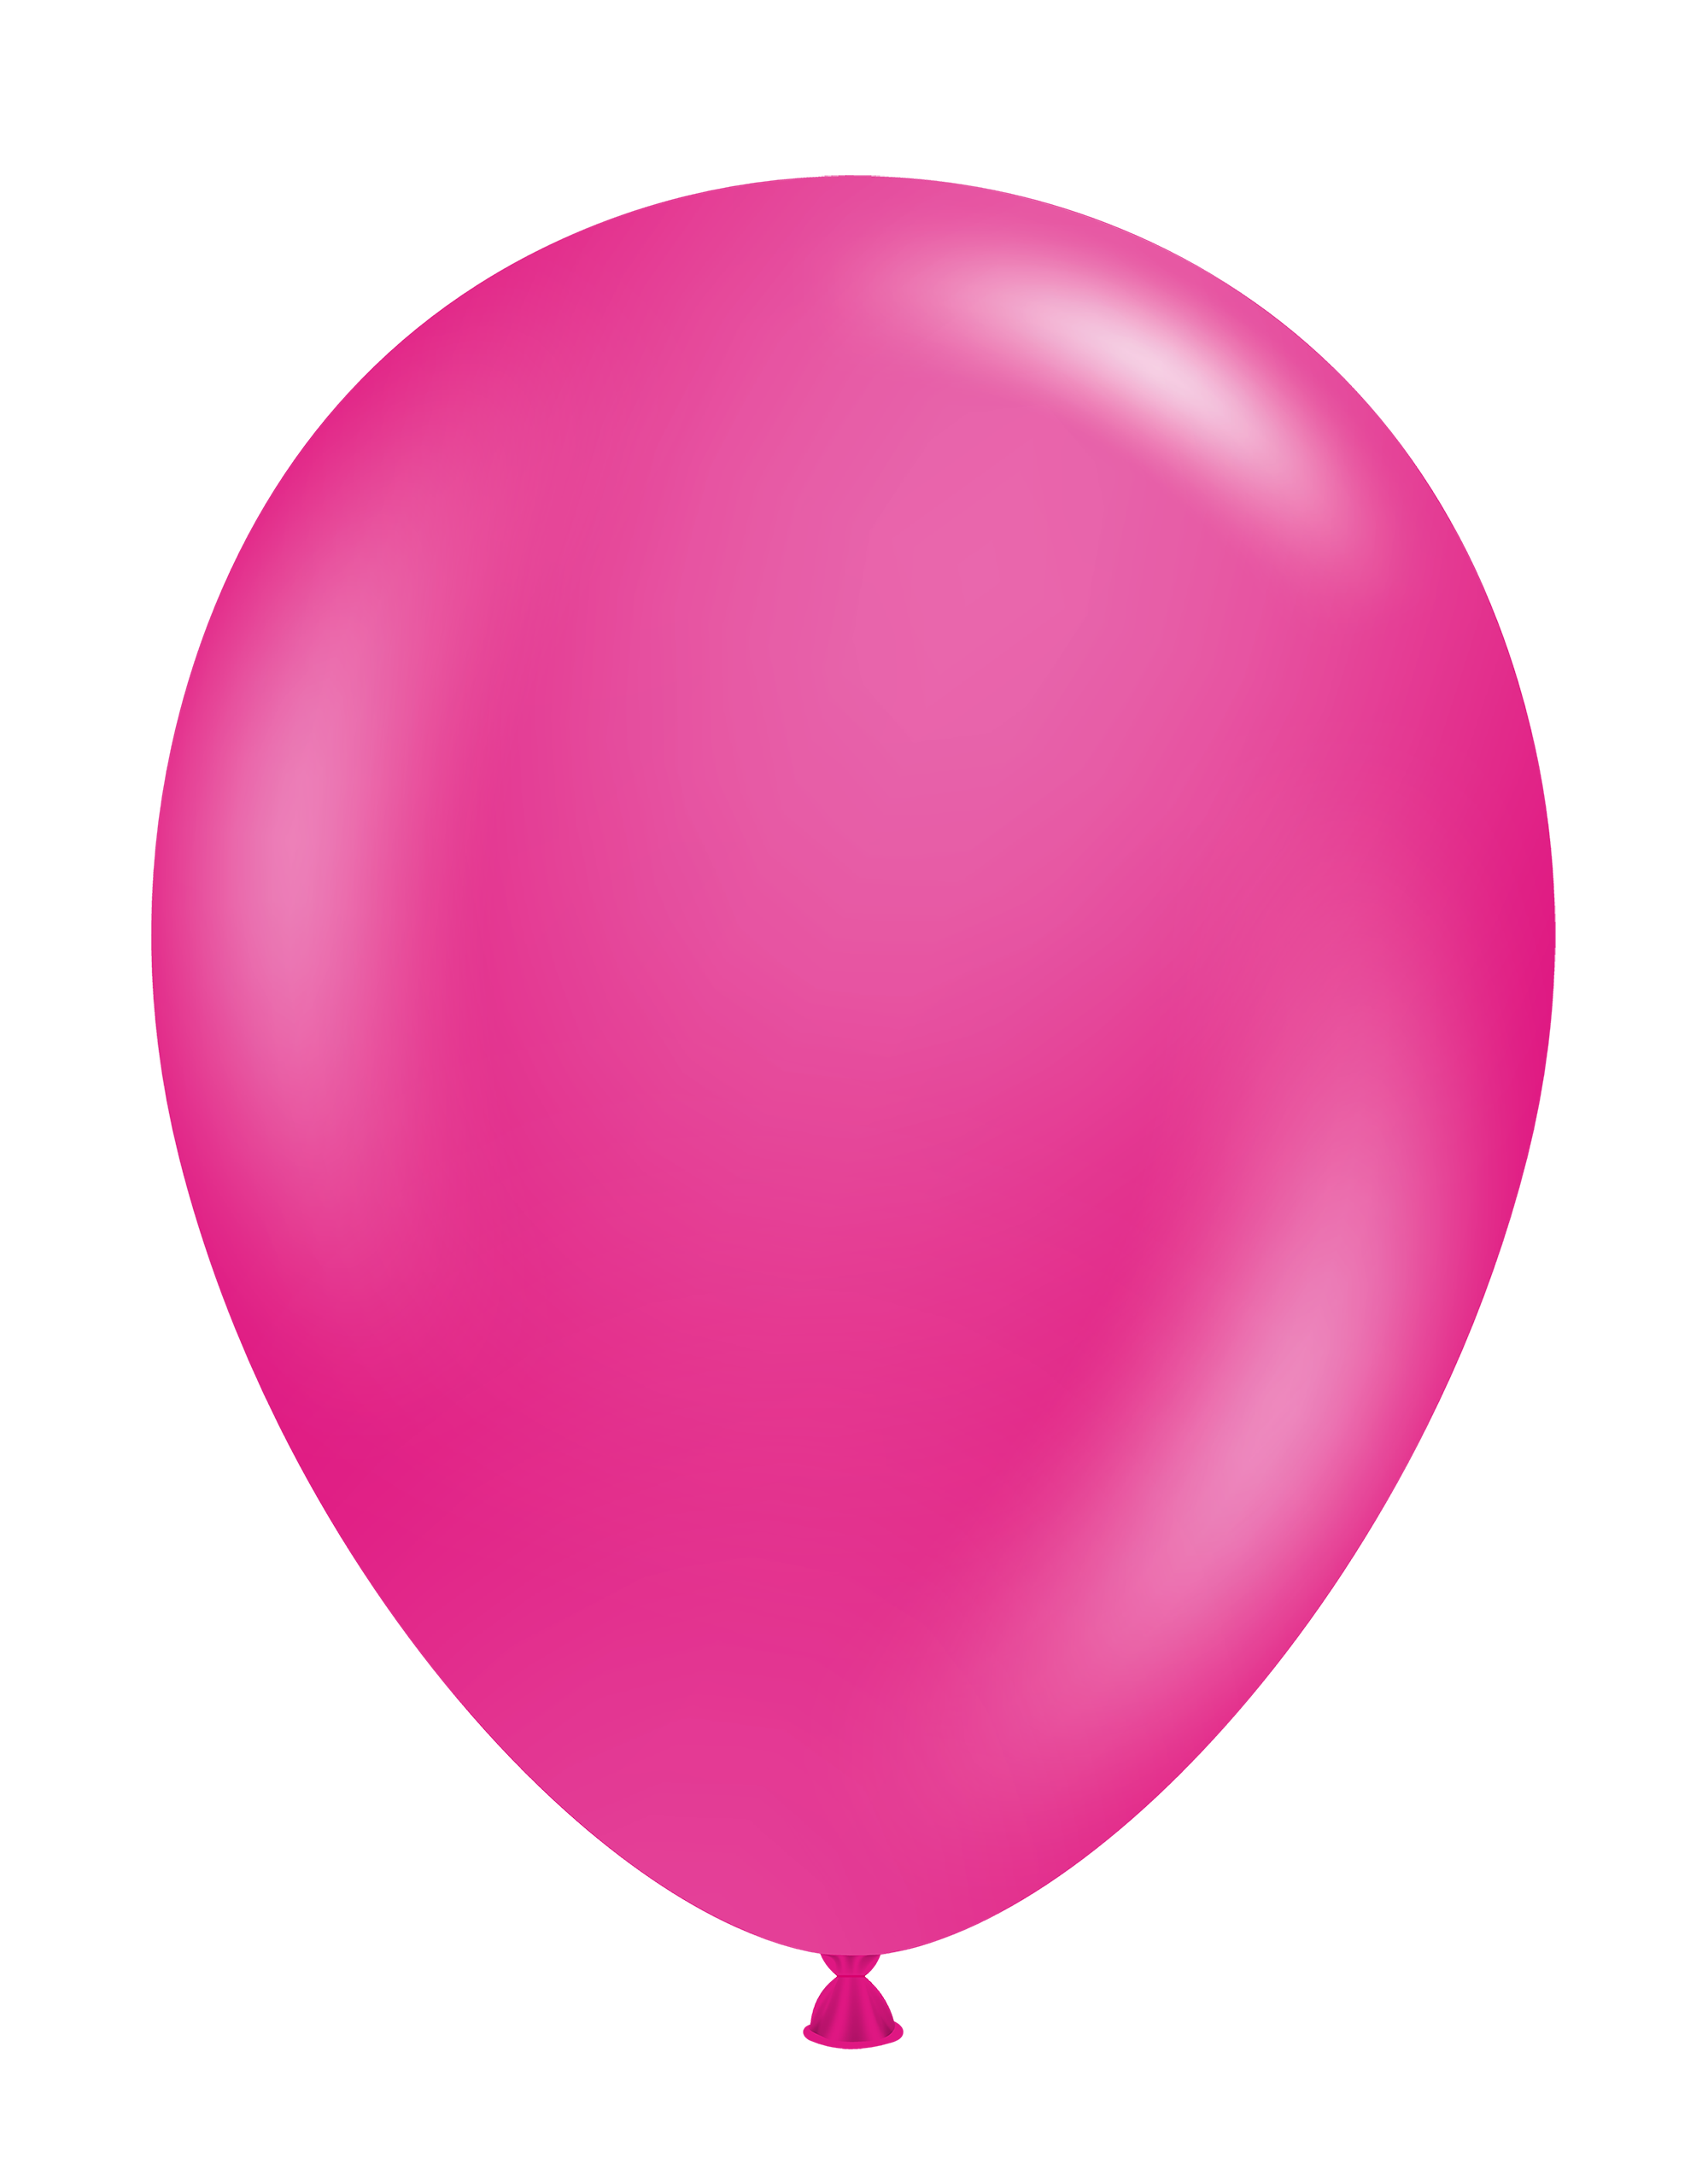 5 Hot Pink - 50ct [T15029] - $3.35 : American Balloon Factory